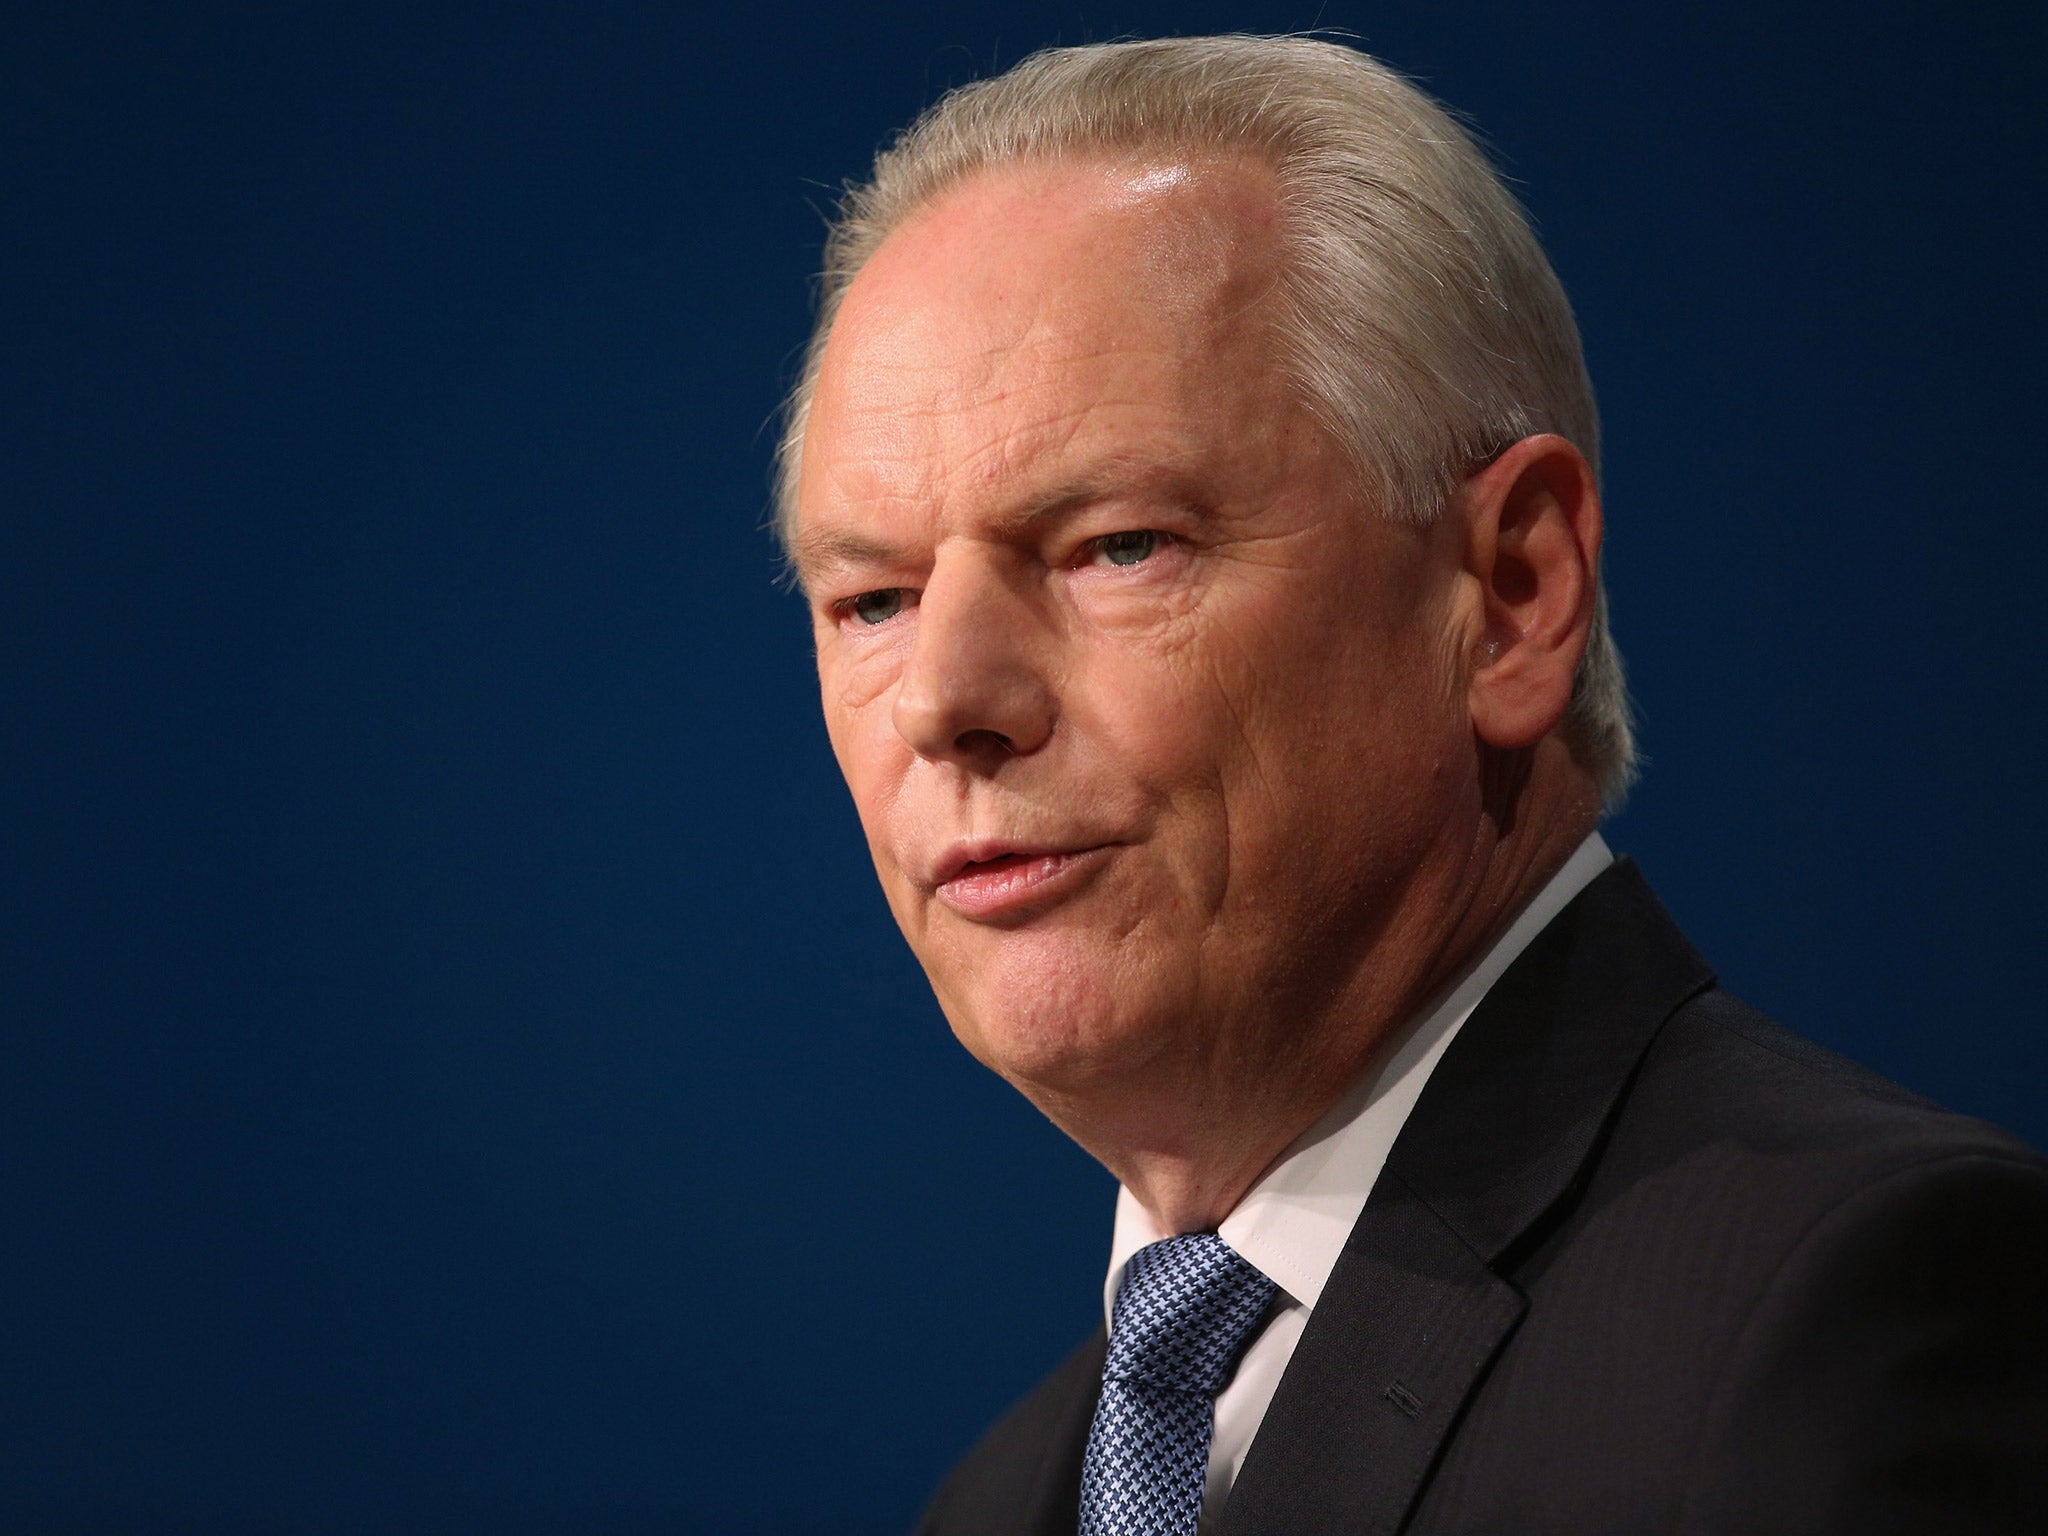 Francis Maude, the Cabinet Office Minister, described the situation as “not acceptable”